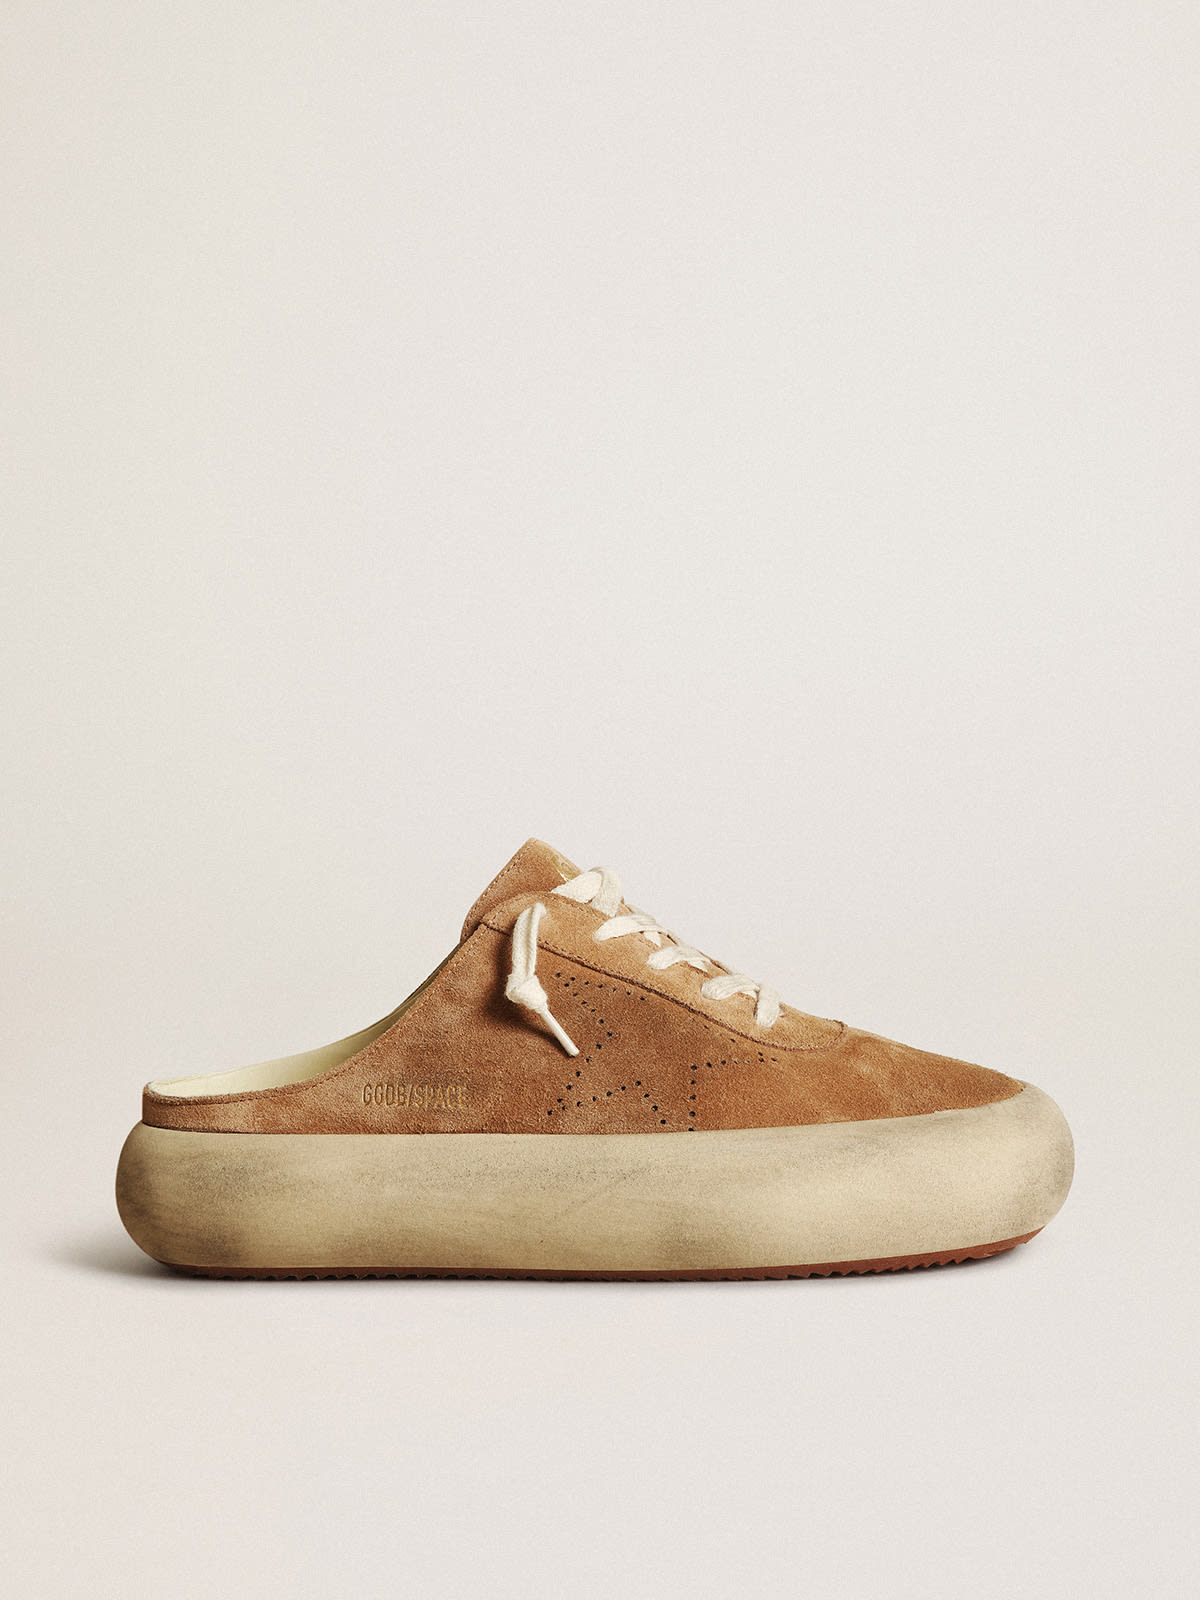 Golden Goose - Women's Space-Star Sabots in tobacco-colored suede with perforated star in 